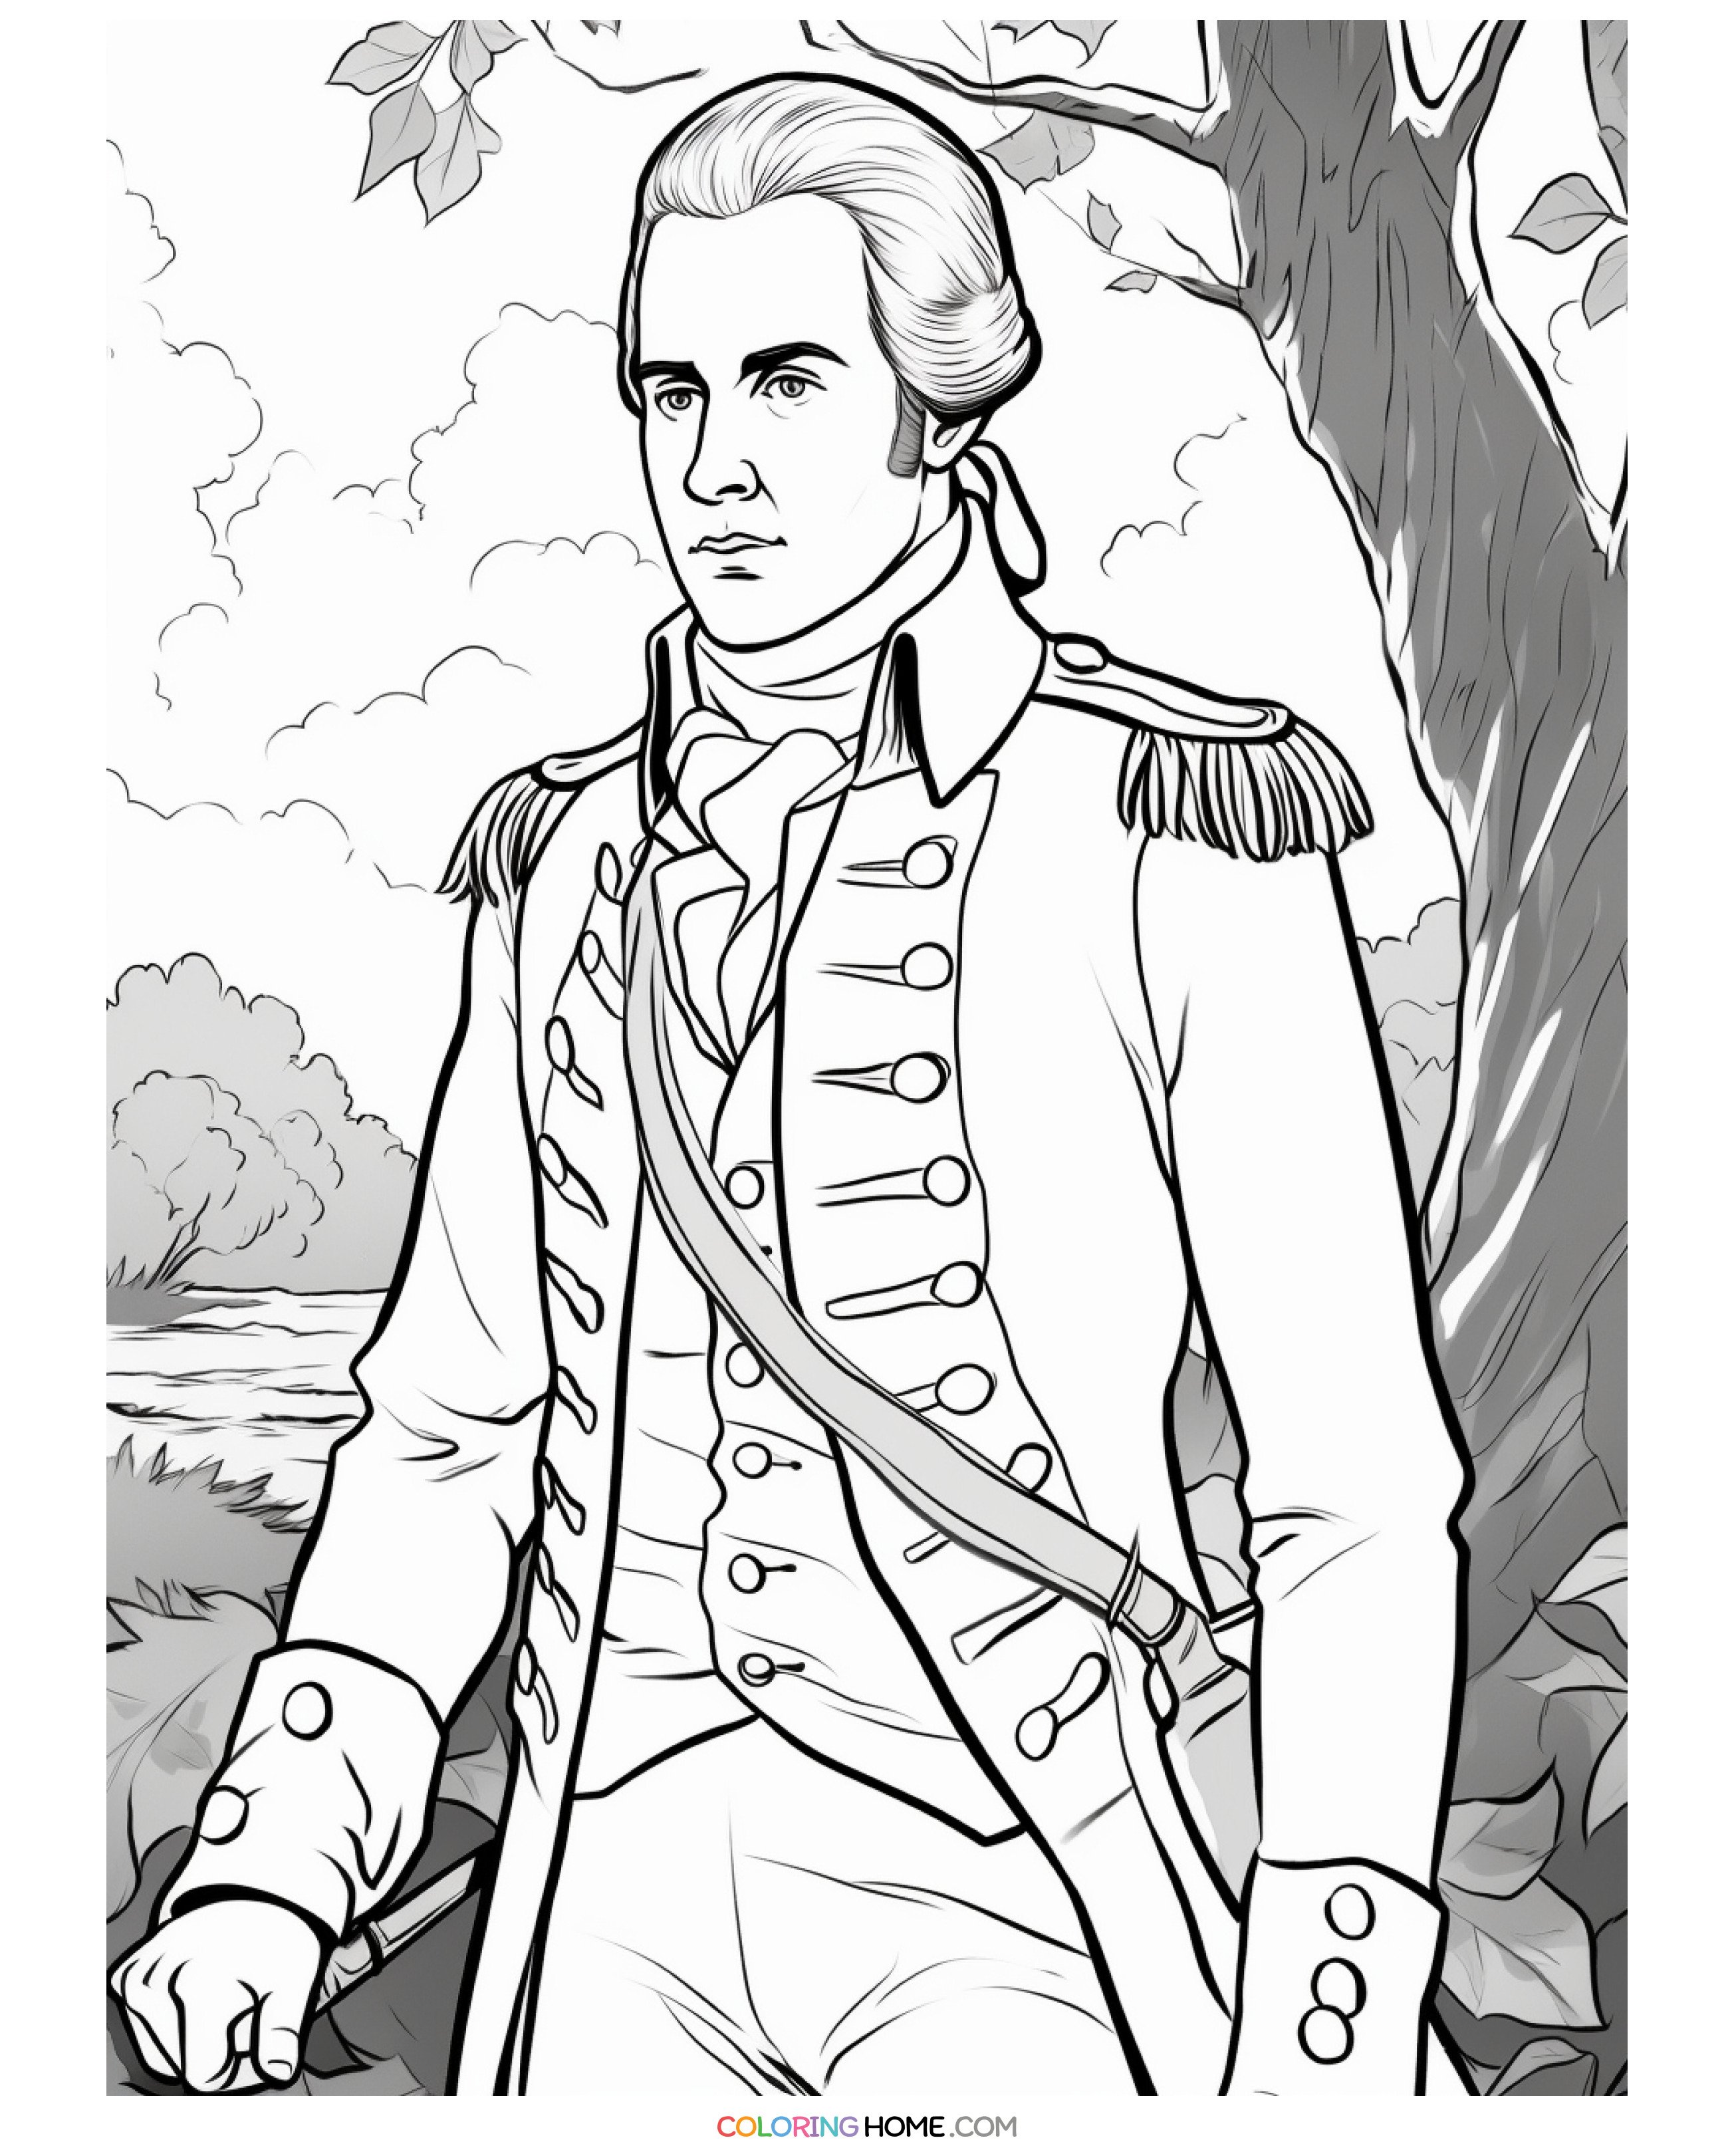 Nathan Hale Coloring Page - Coloring Home